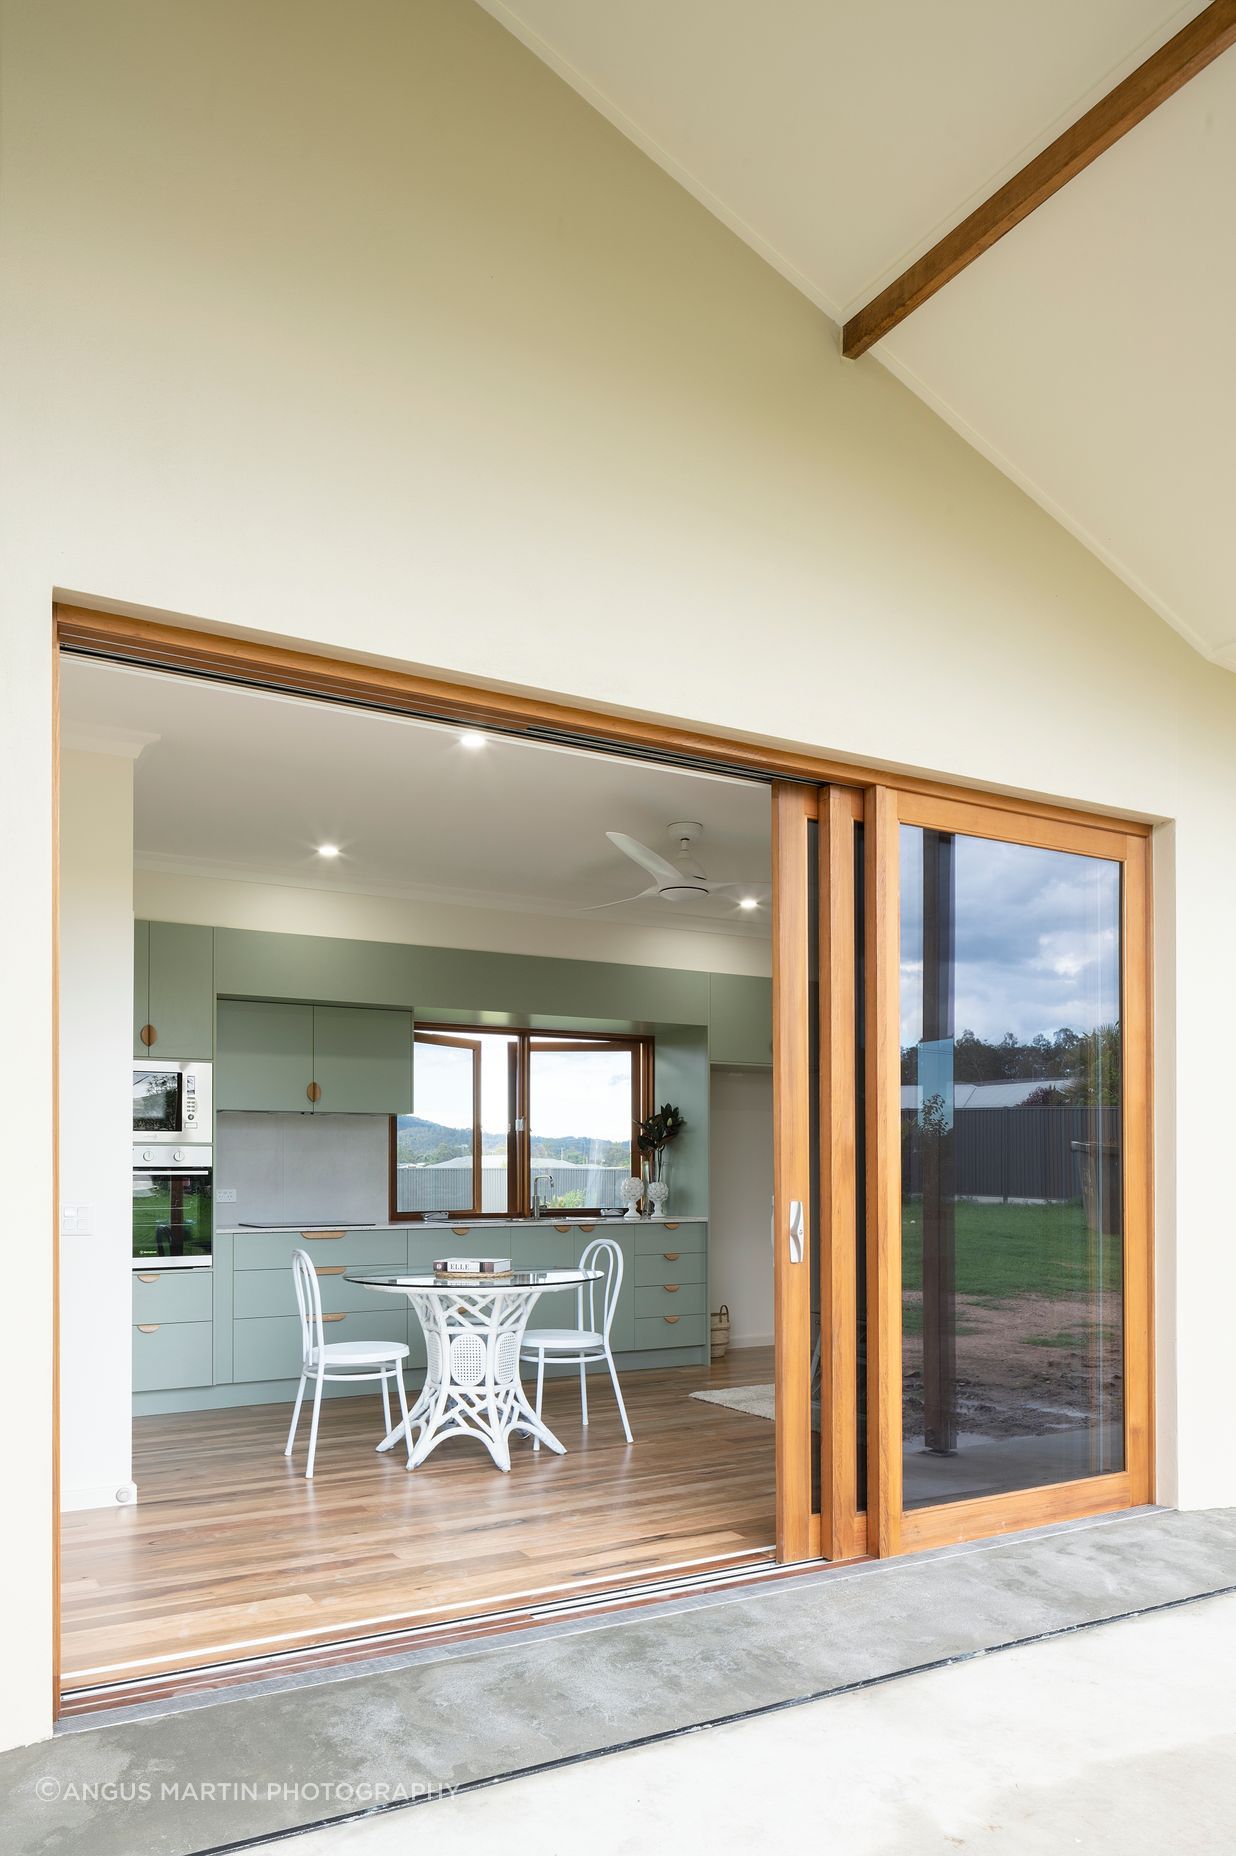 High performance glazing is key to an energy efficient home. Timber framing and double glazing substantially reduce heat transfer in or out in weather extremes. LowE and tinting reduce summer heat incursion. Photo:®Angus Martin